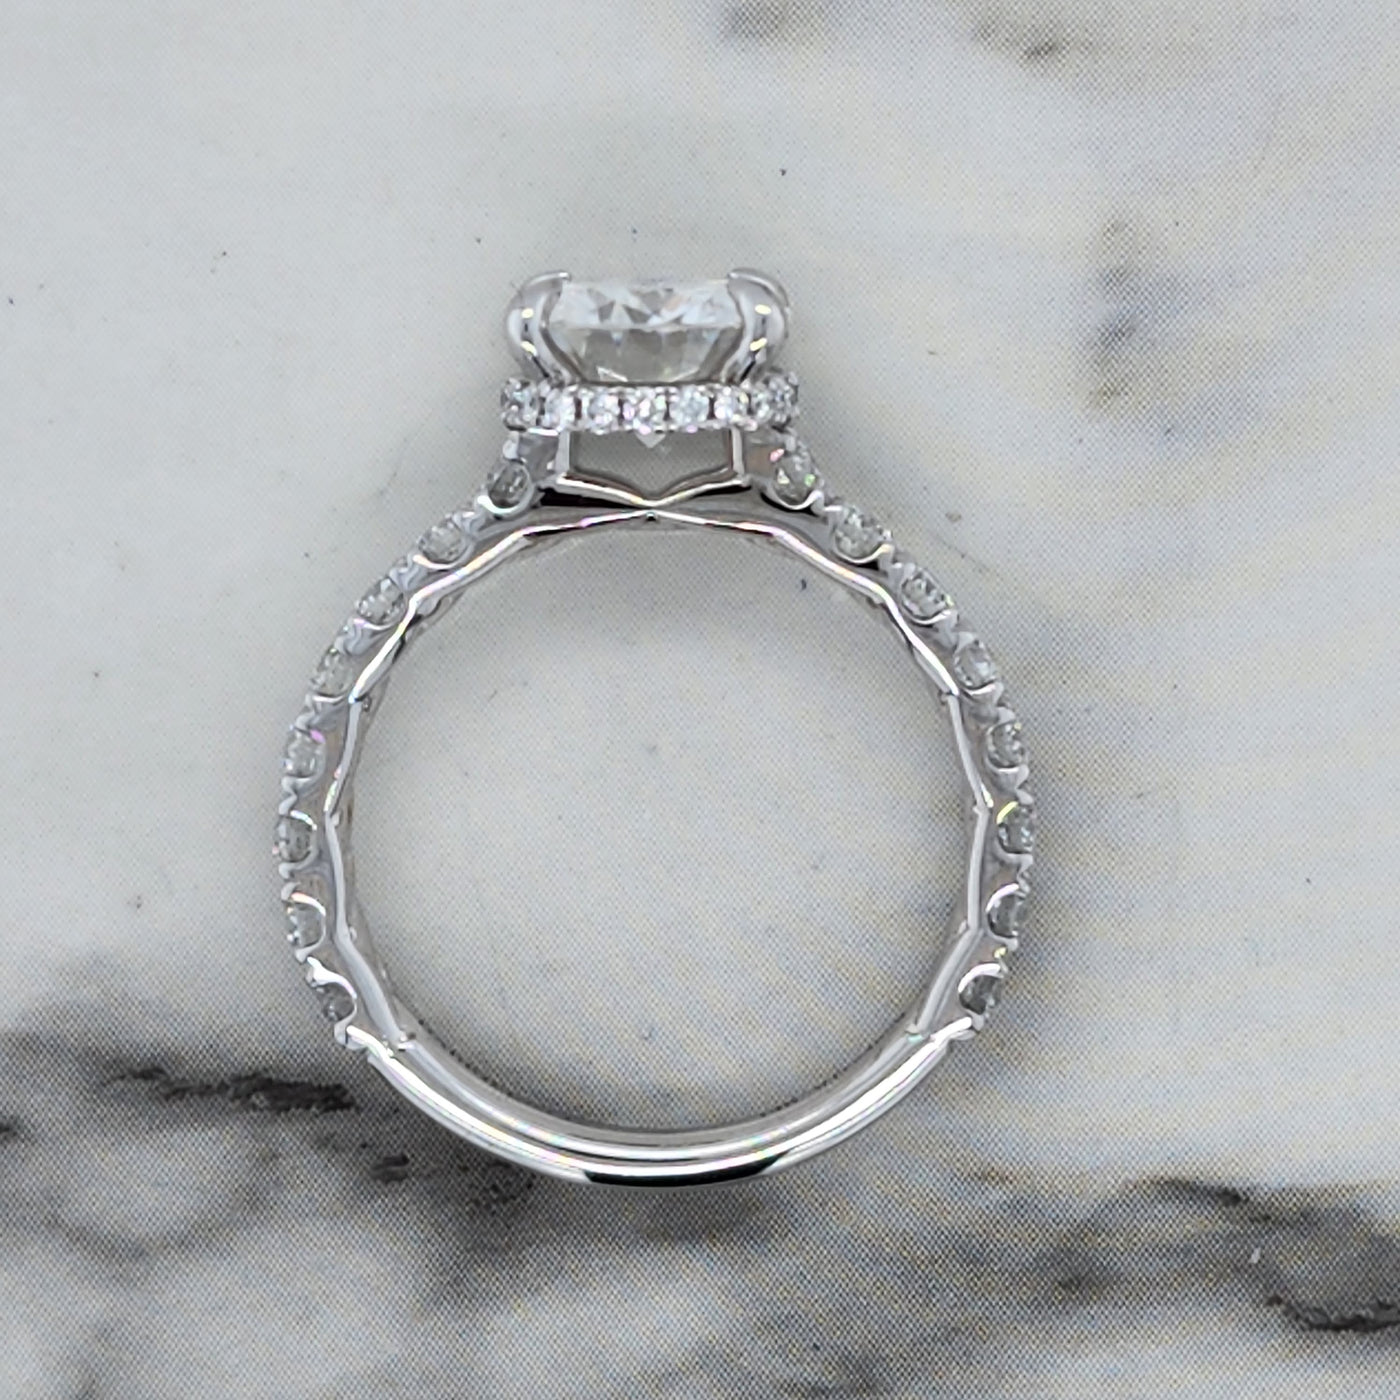 Custom White Gold Engagement Ring With Moissanite Center and Diamond Accent Stones